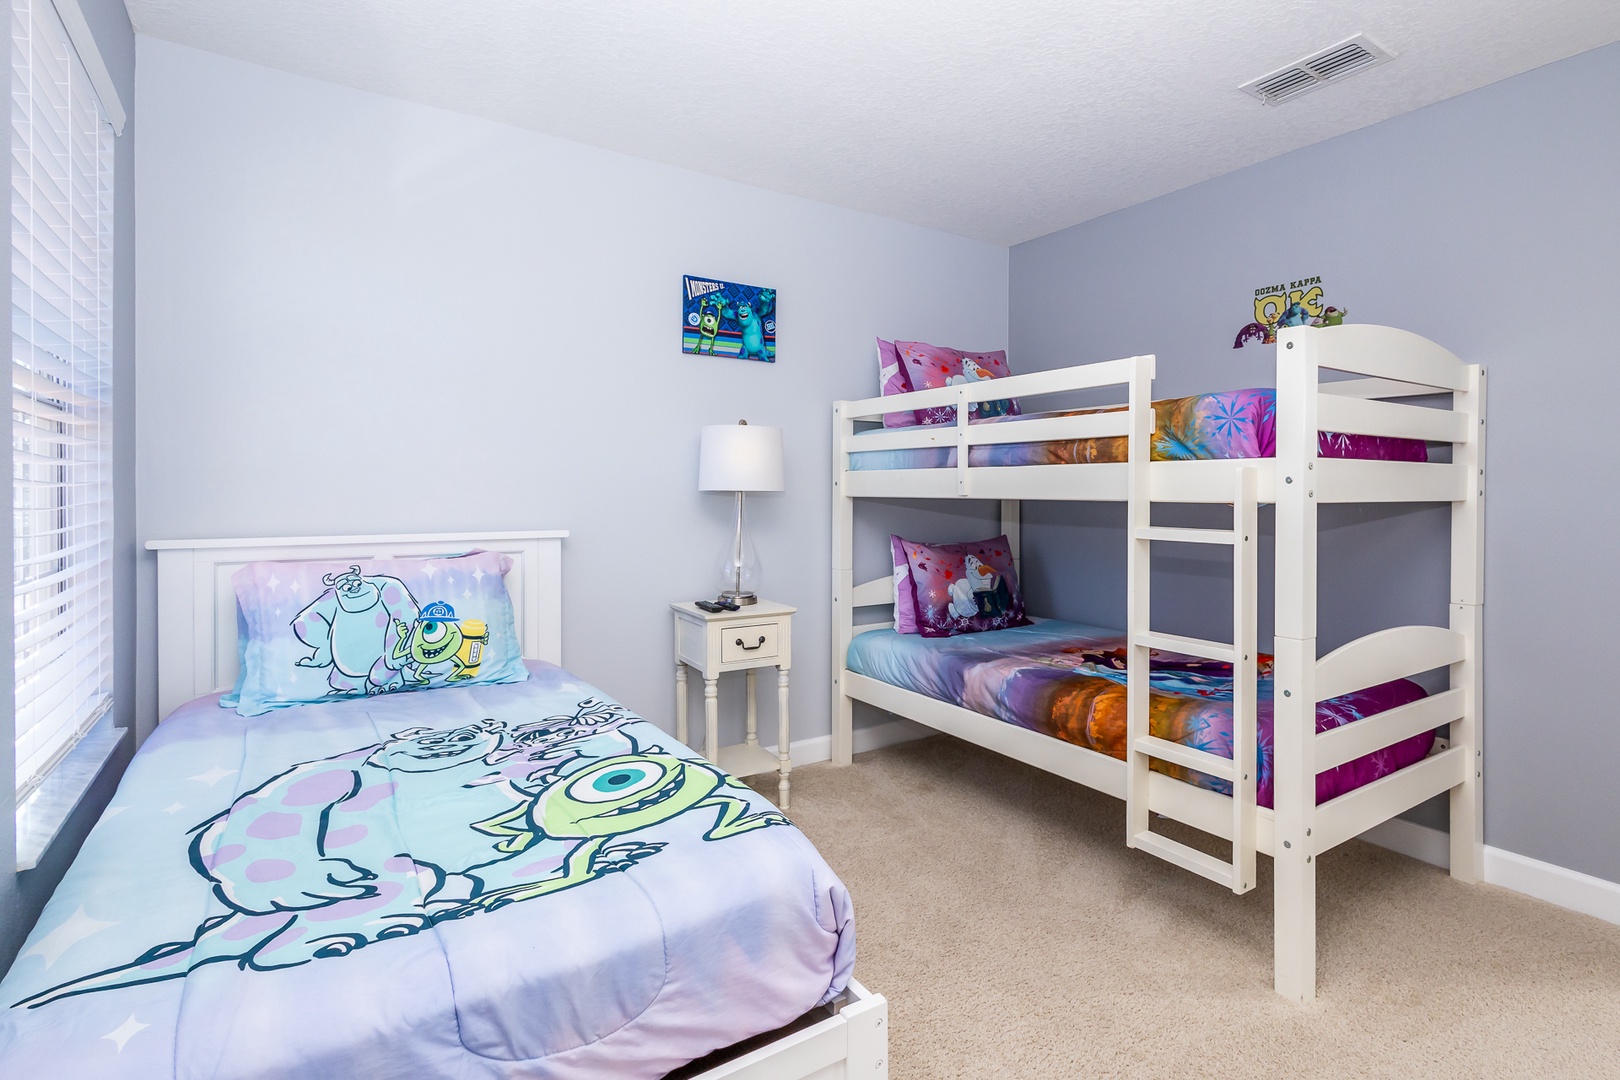 There’ll be nothing to scream over in this comfortable Bedroom with 1 twin bed and 1 bunk bed